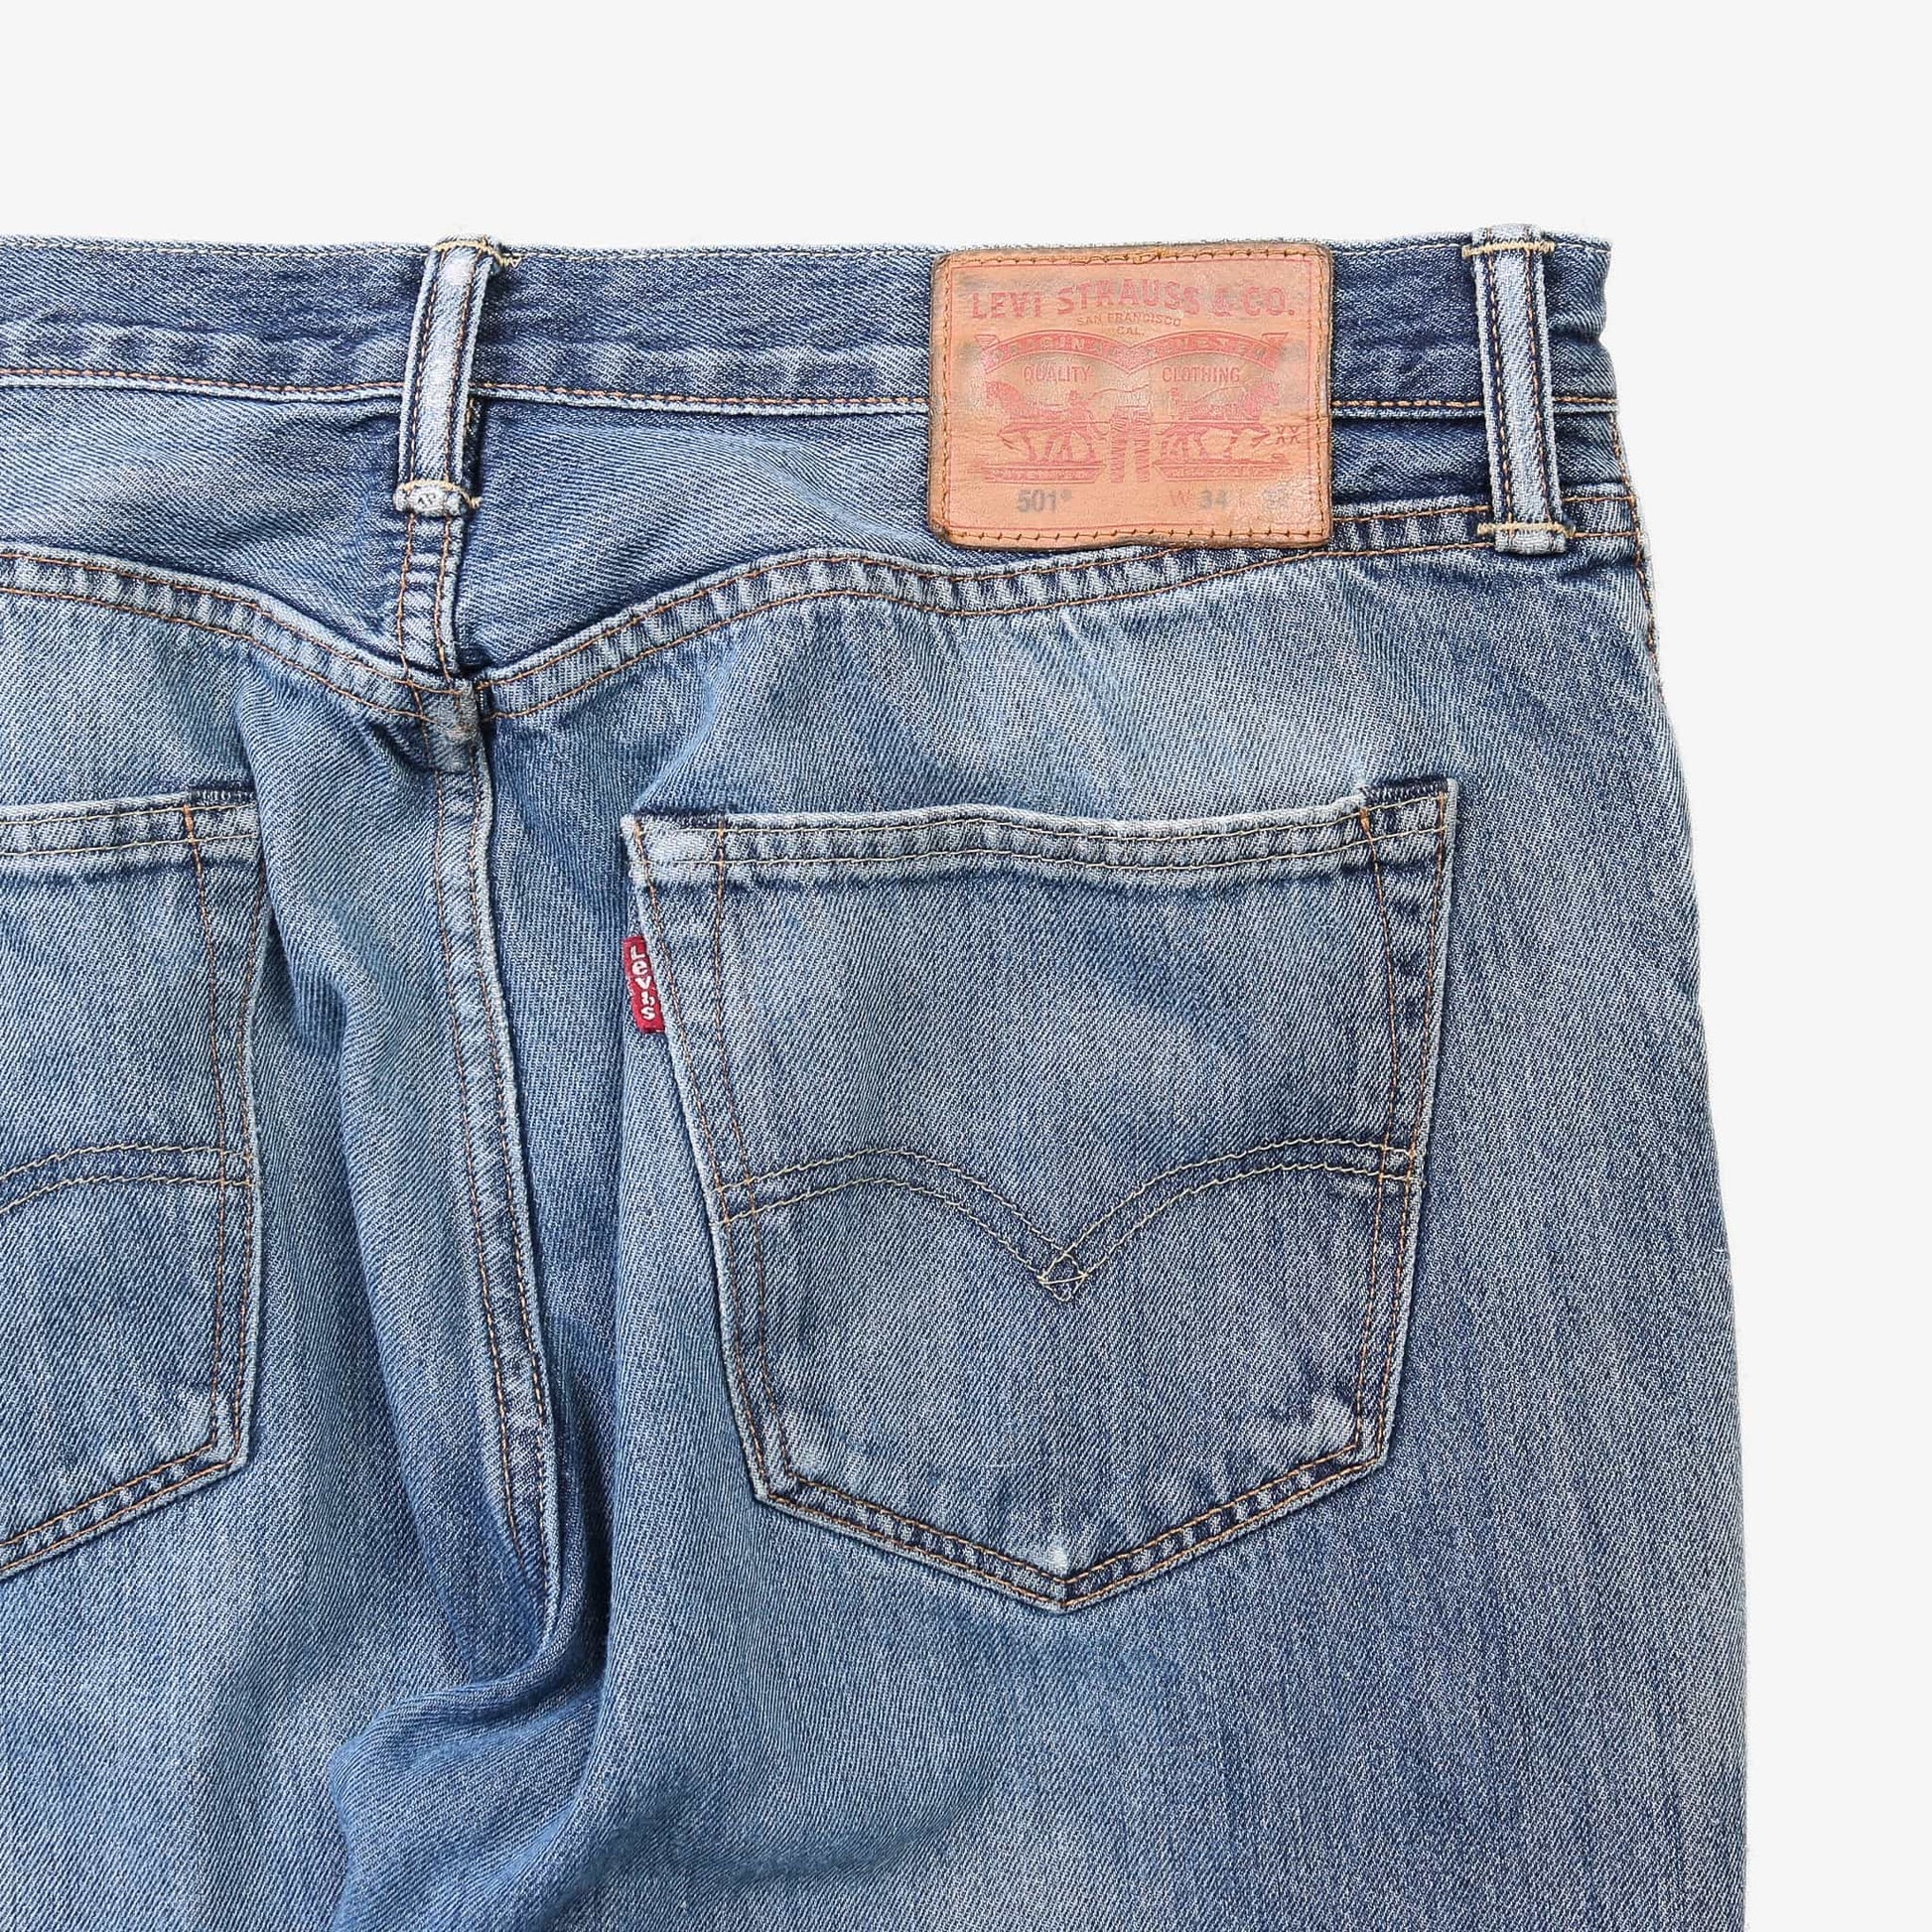 Vintage Levi's 501 Jeans - 34" 32" - American Madness